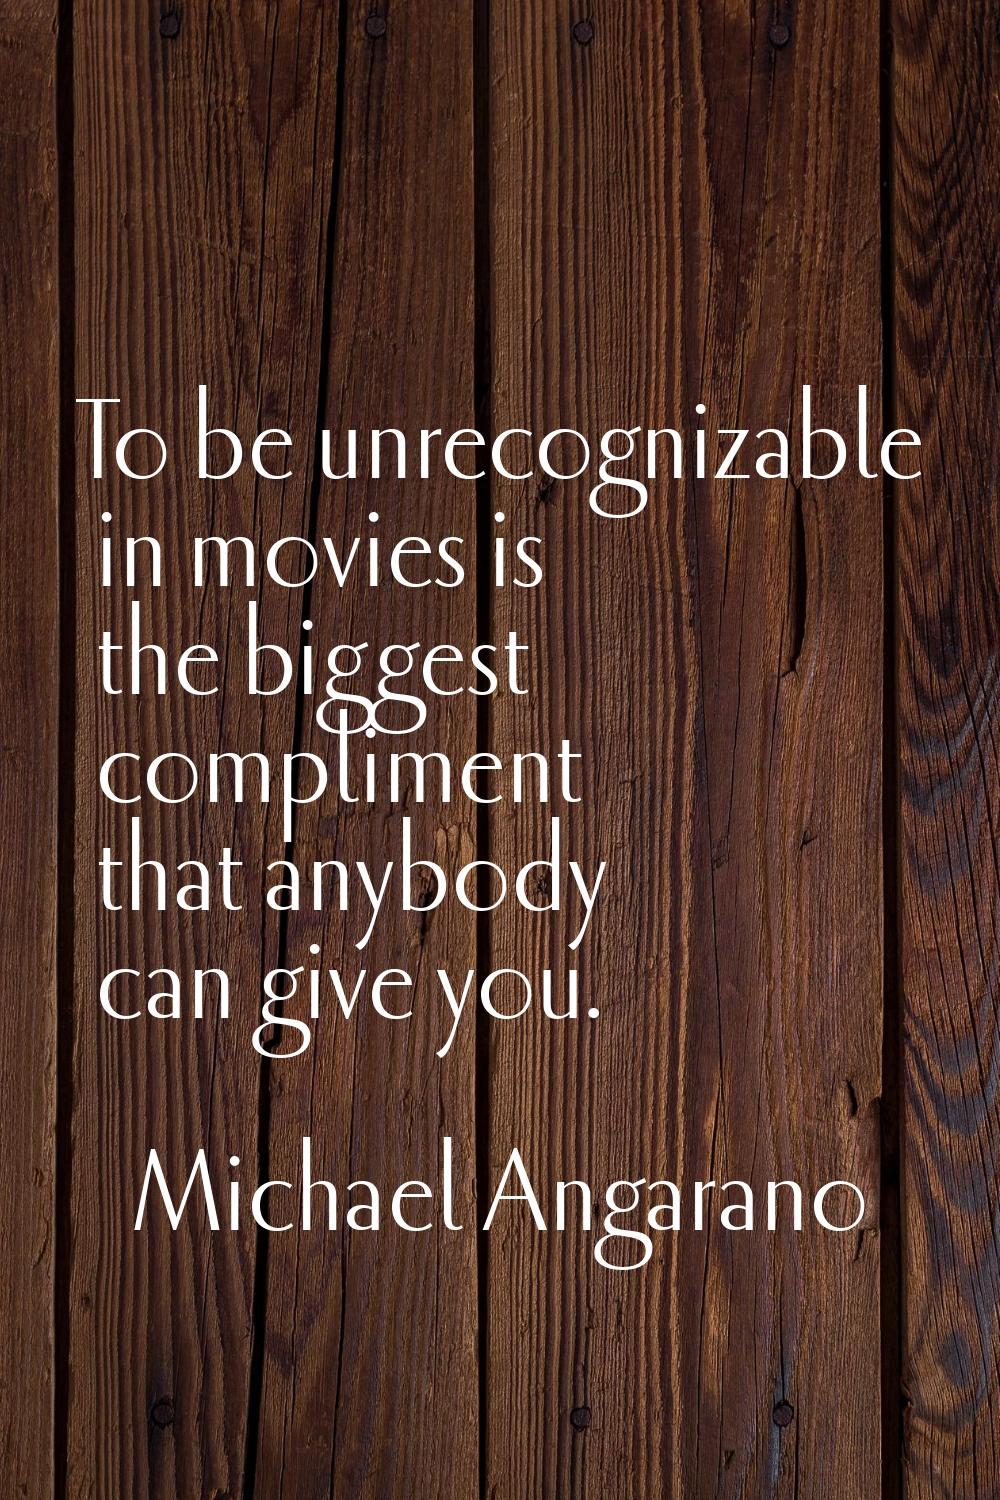 To be unrecognizable in movies is the biggest compliment that anybody can give you.